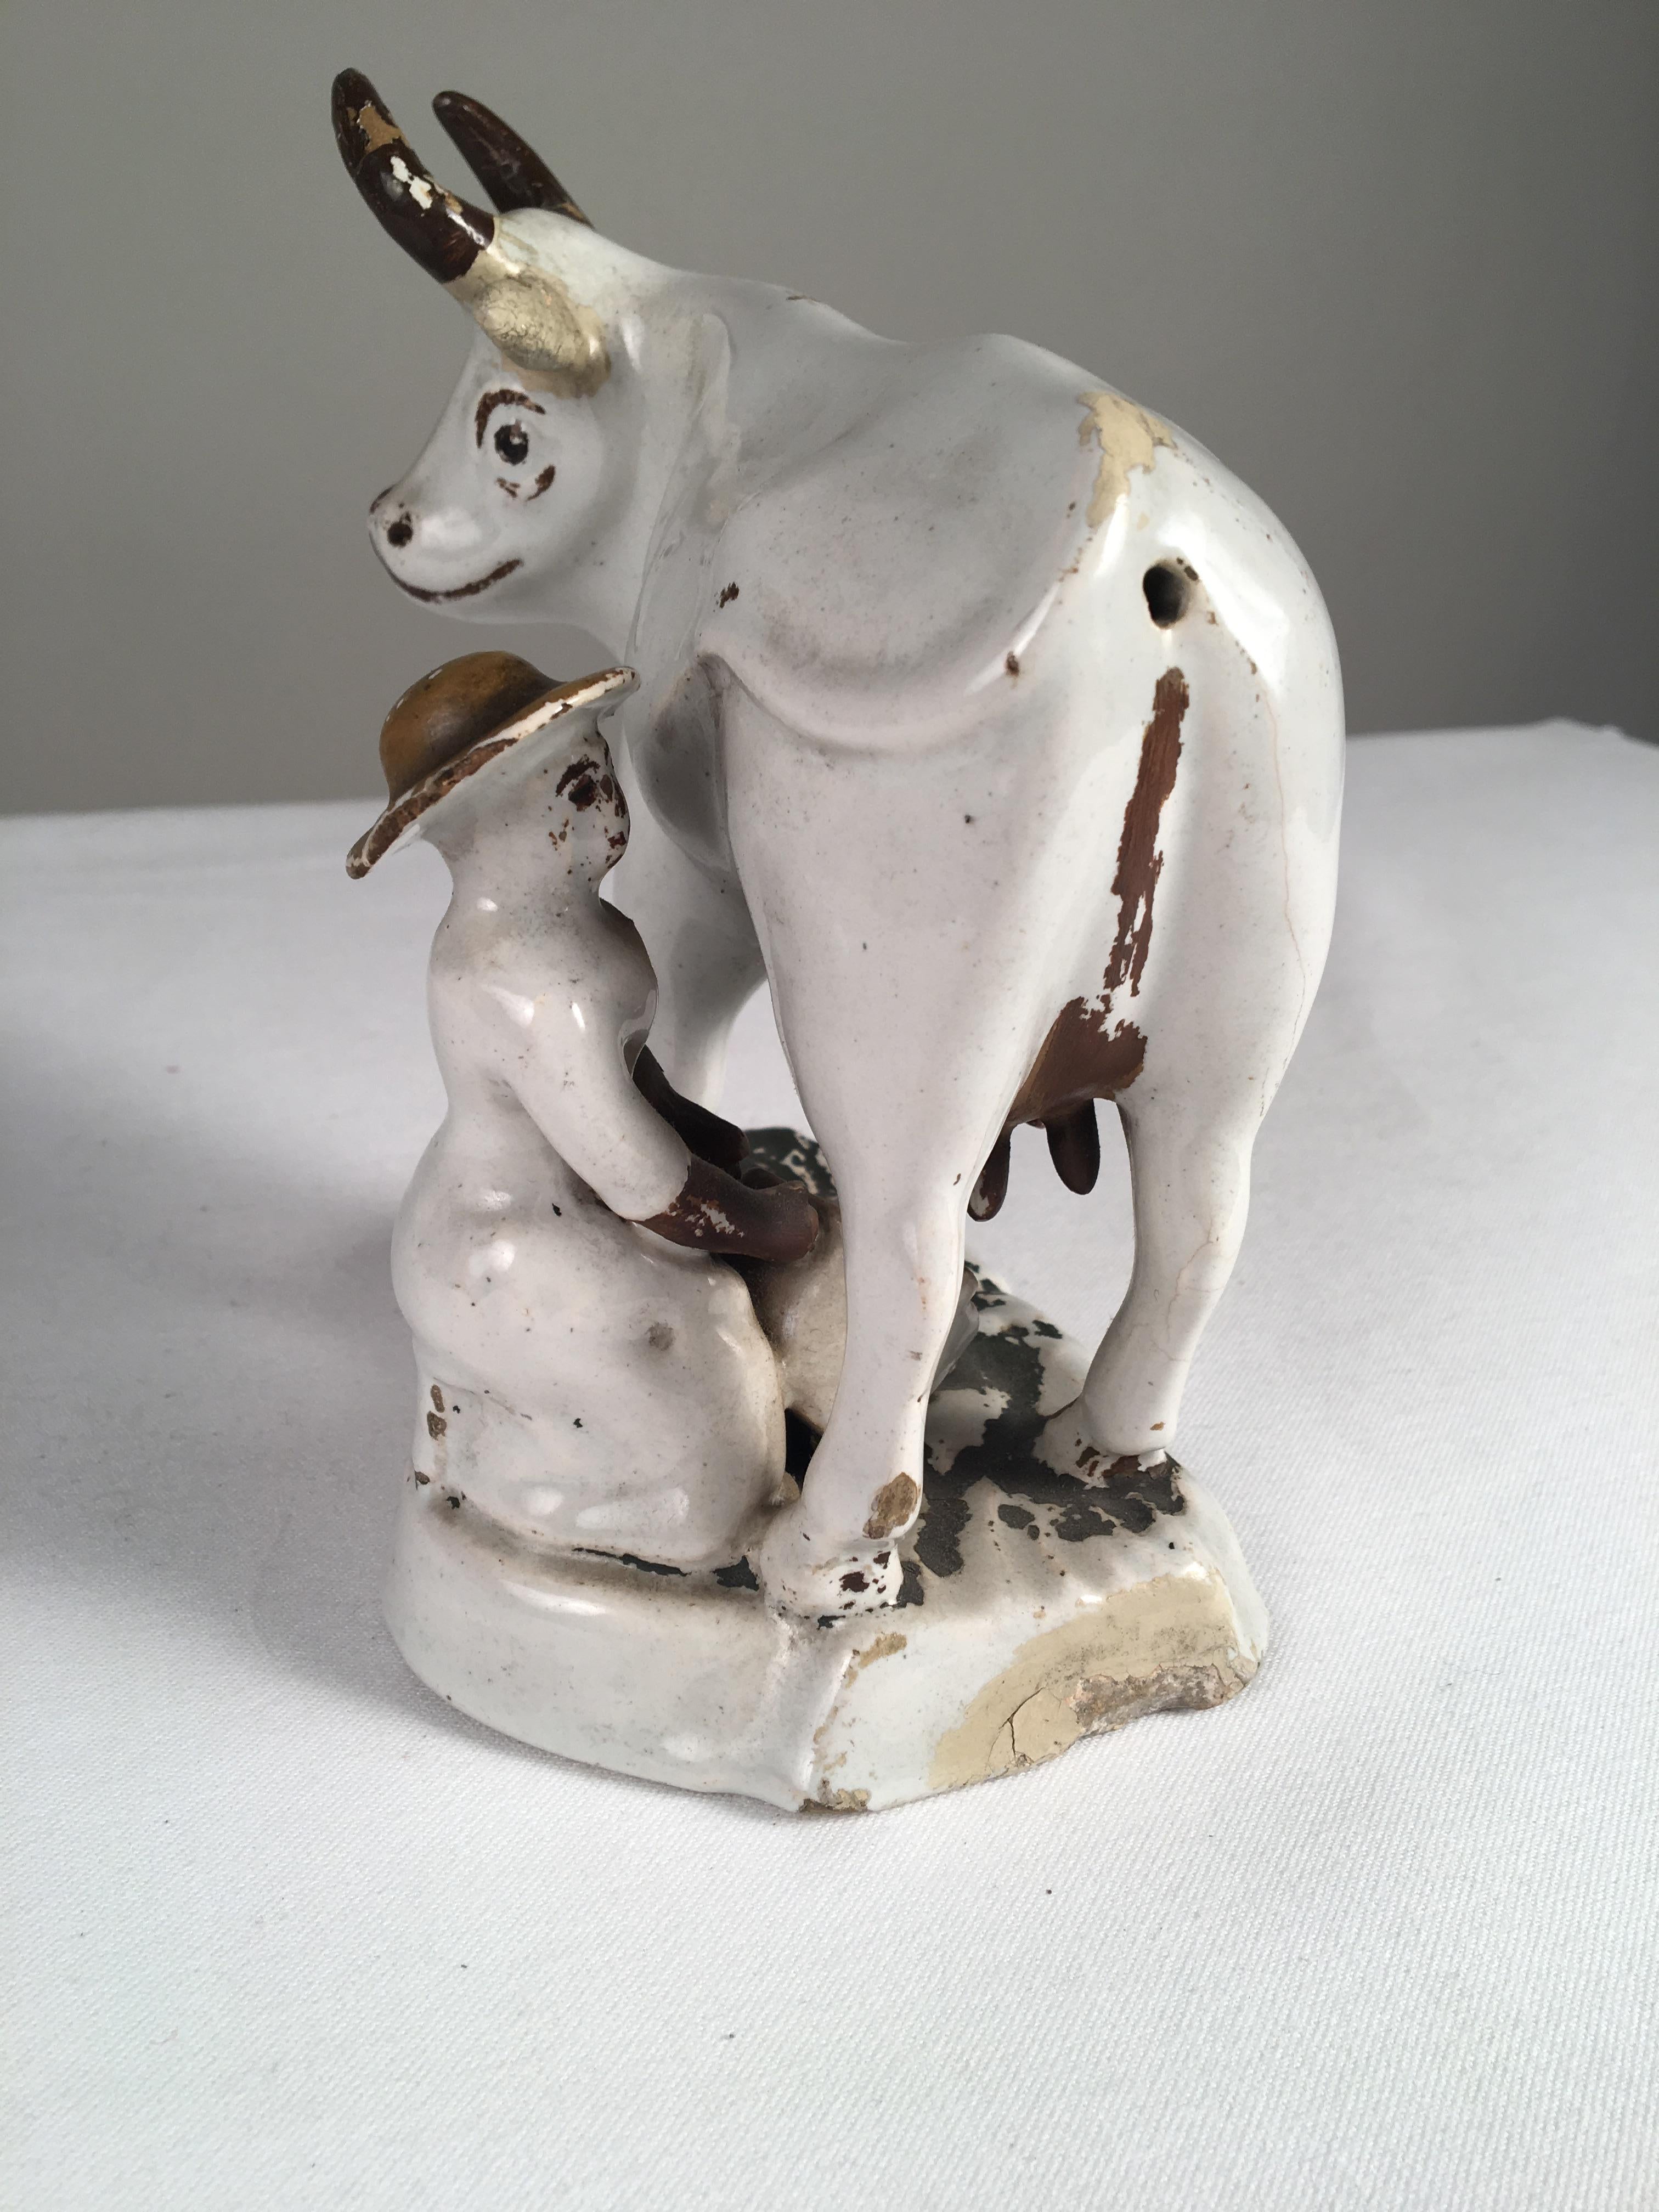 An unusual undecorated Staffordshire cow figurine, with painted details, early 19th century, English.